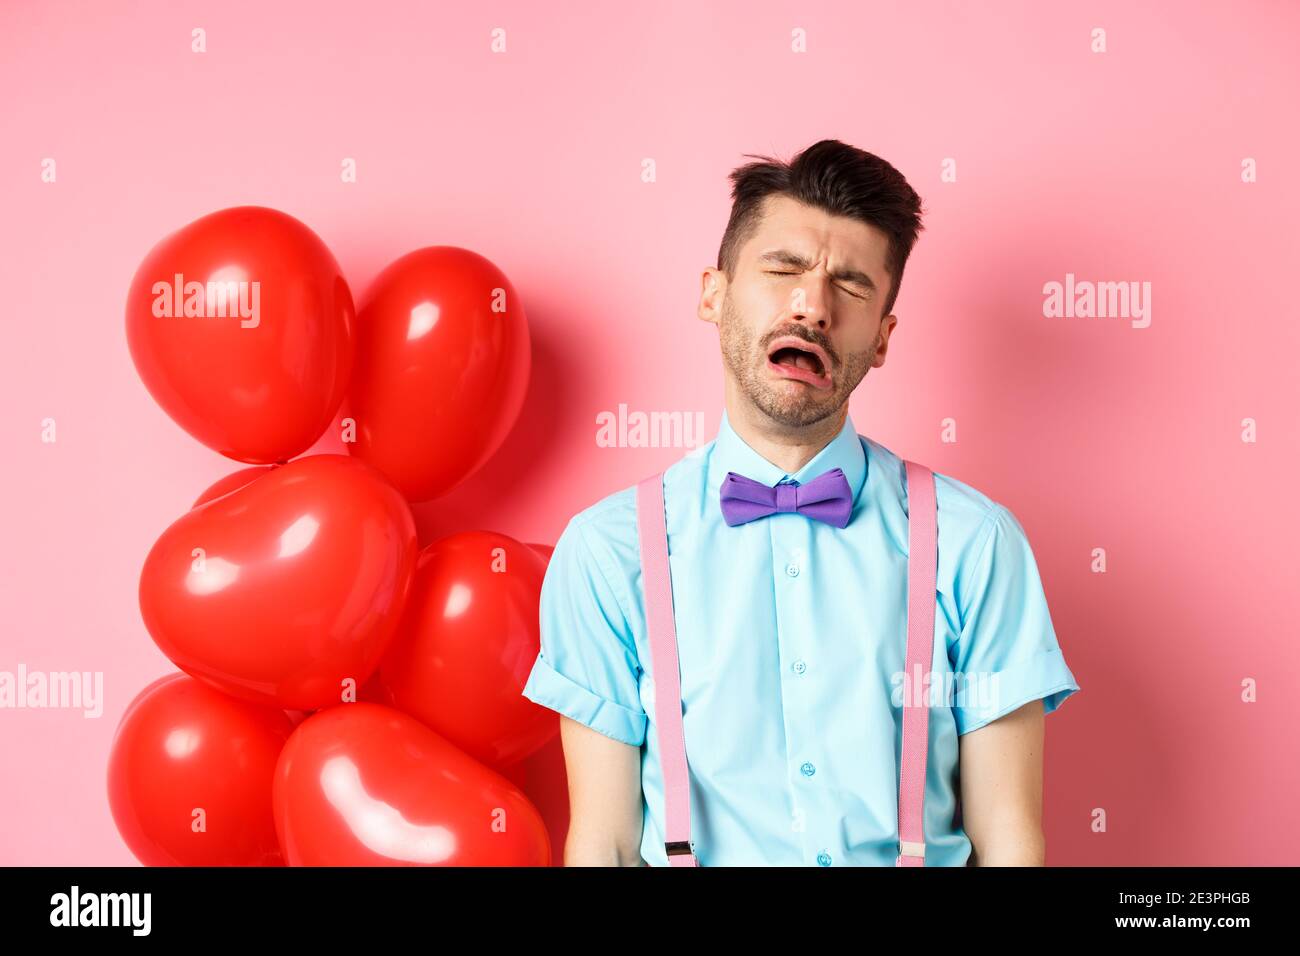 Valentines concept. Sad and heartbroken man crying over break-up, being cheated on lovers day, sobbing and feeling lonely, standing on pink background Stock Photo